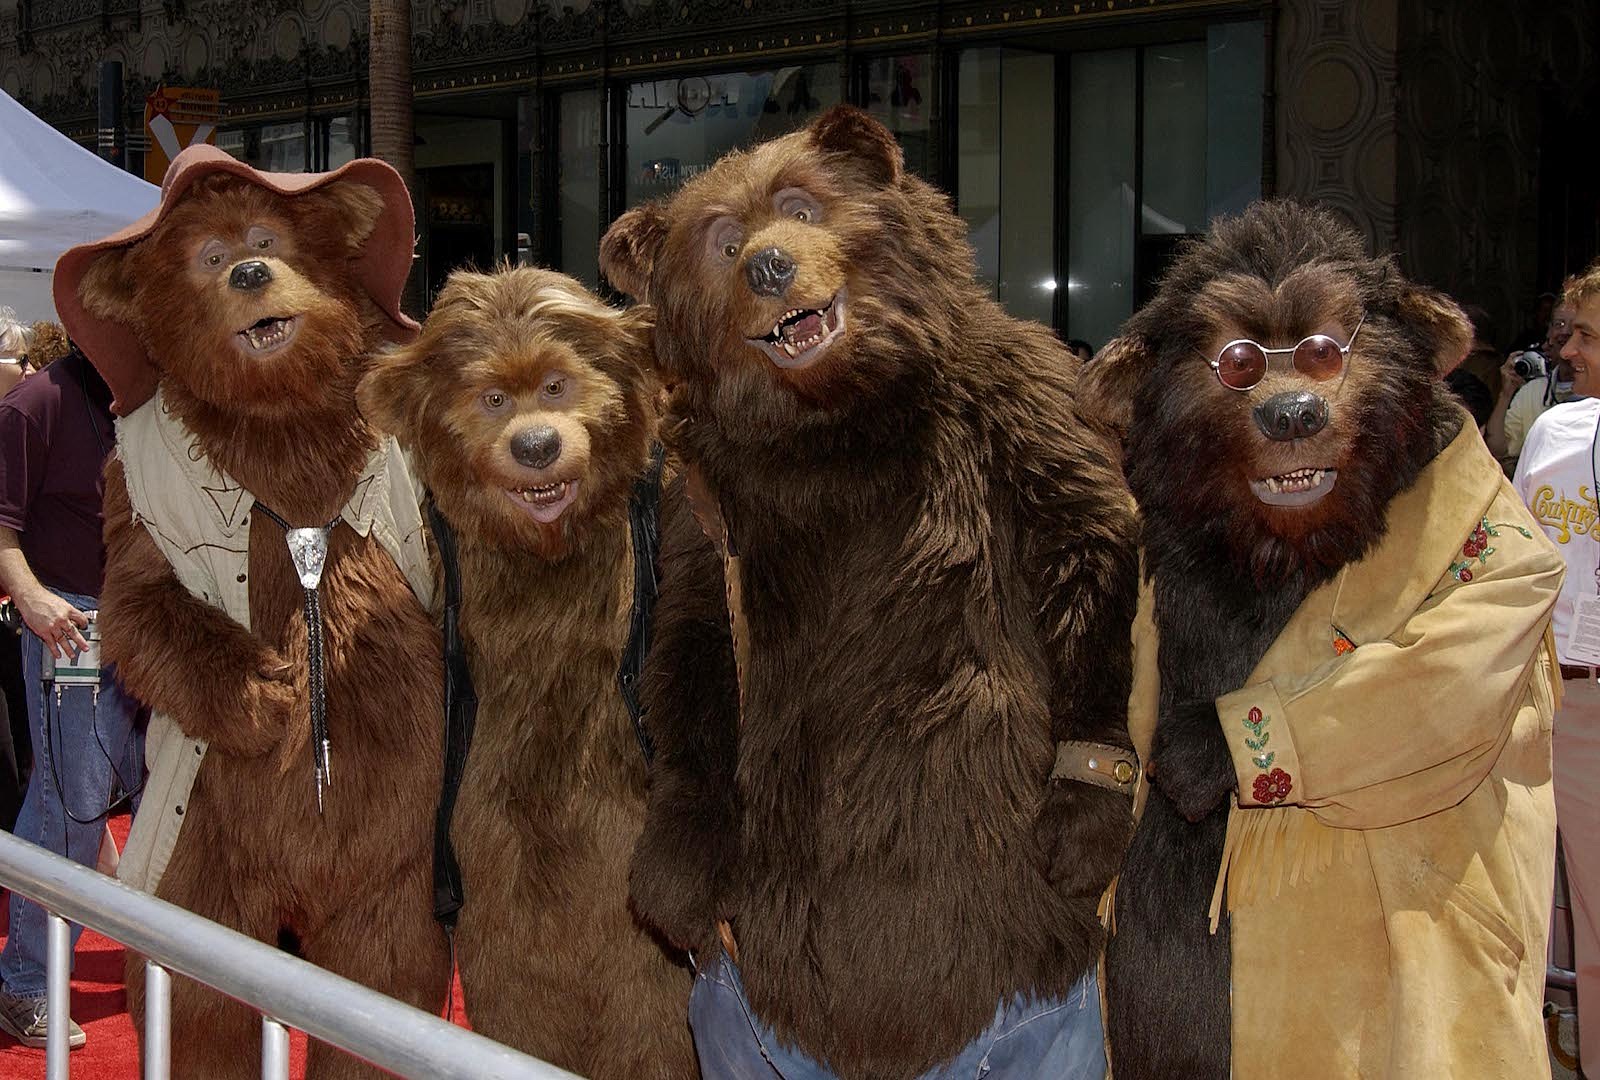 How 'The Country Bears' Became the Strangest Disney Movie Ever